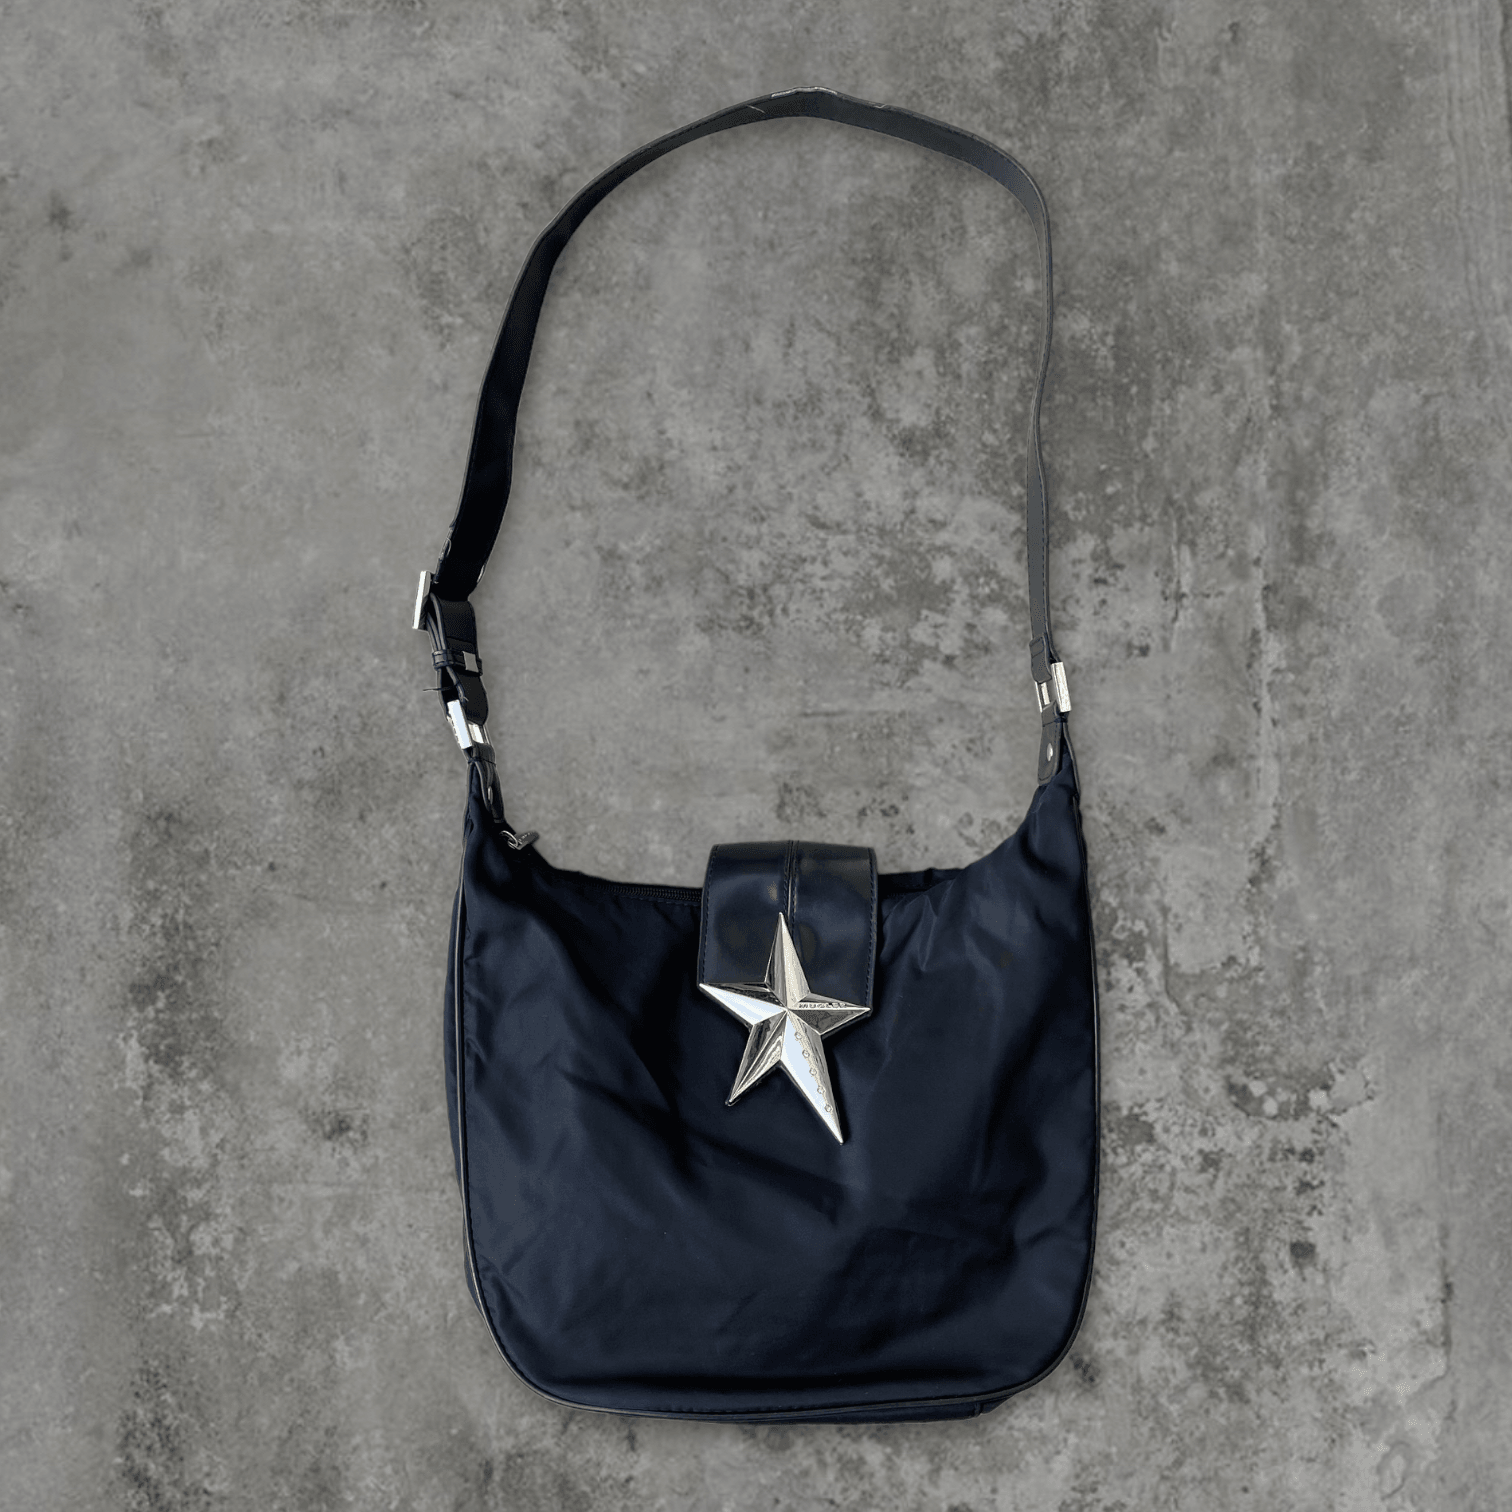 THIERRY MUGLER CHROME STAR SIDE BAG - Known Source